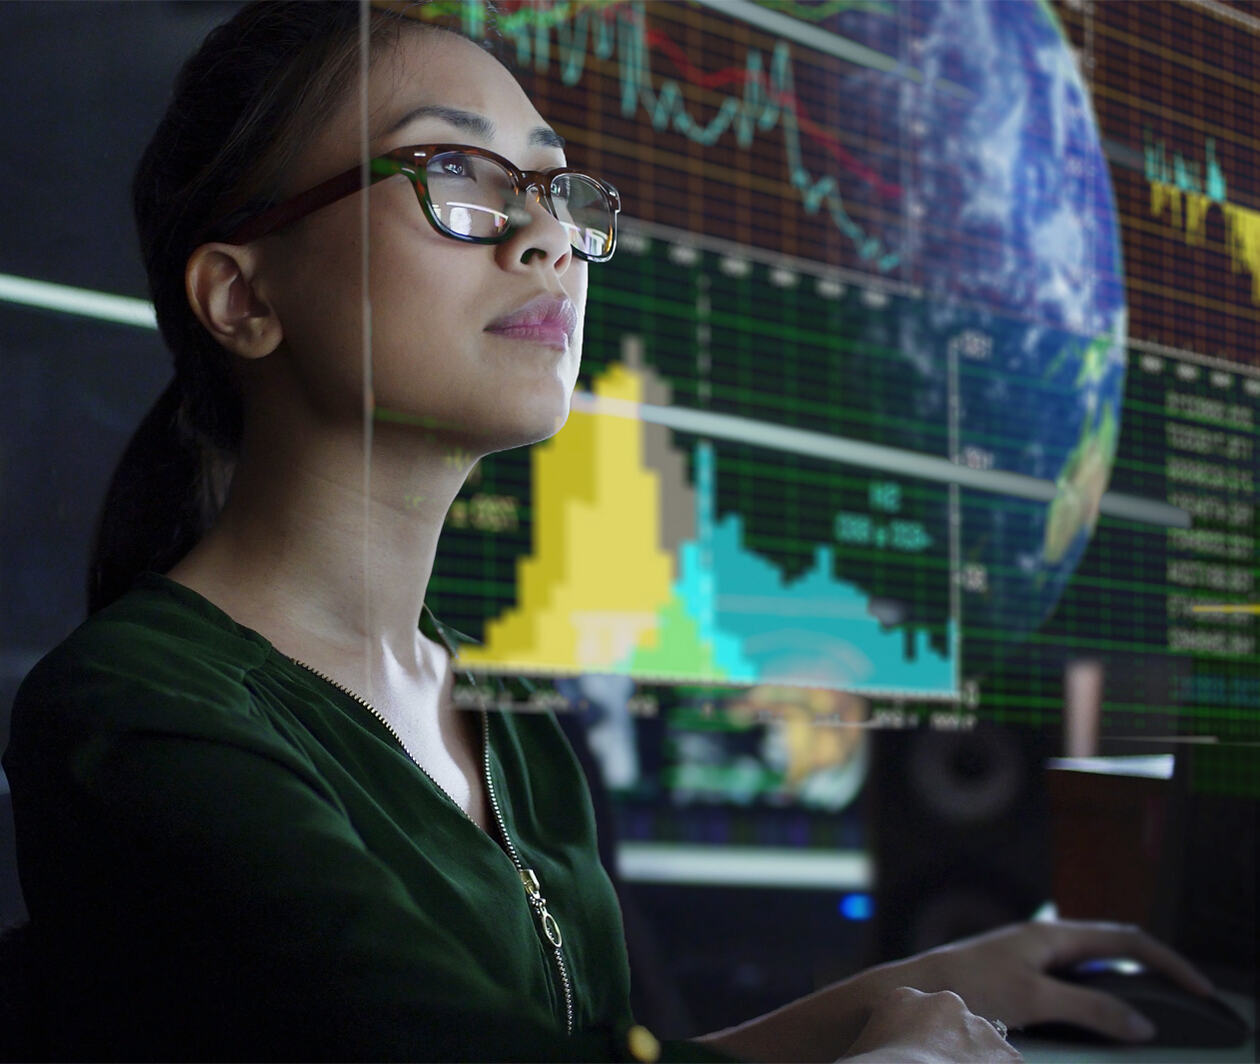 A young Asian woman looking at the global & environmental data projected on a see through display whilst seated in a dark office